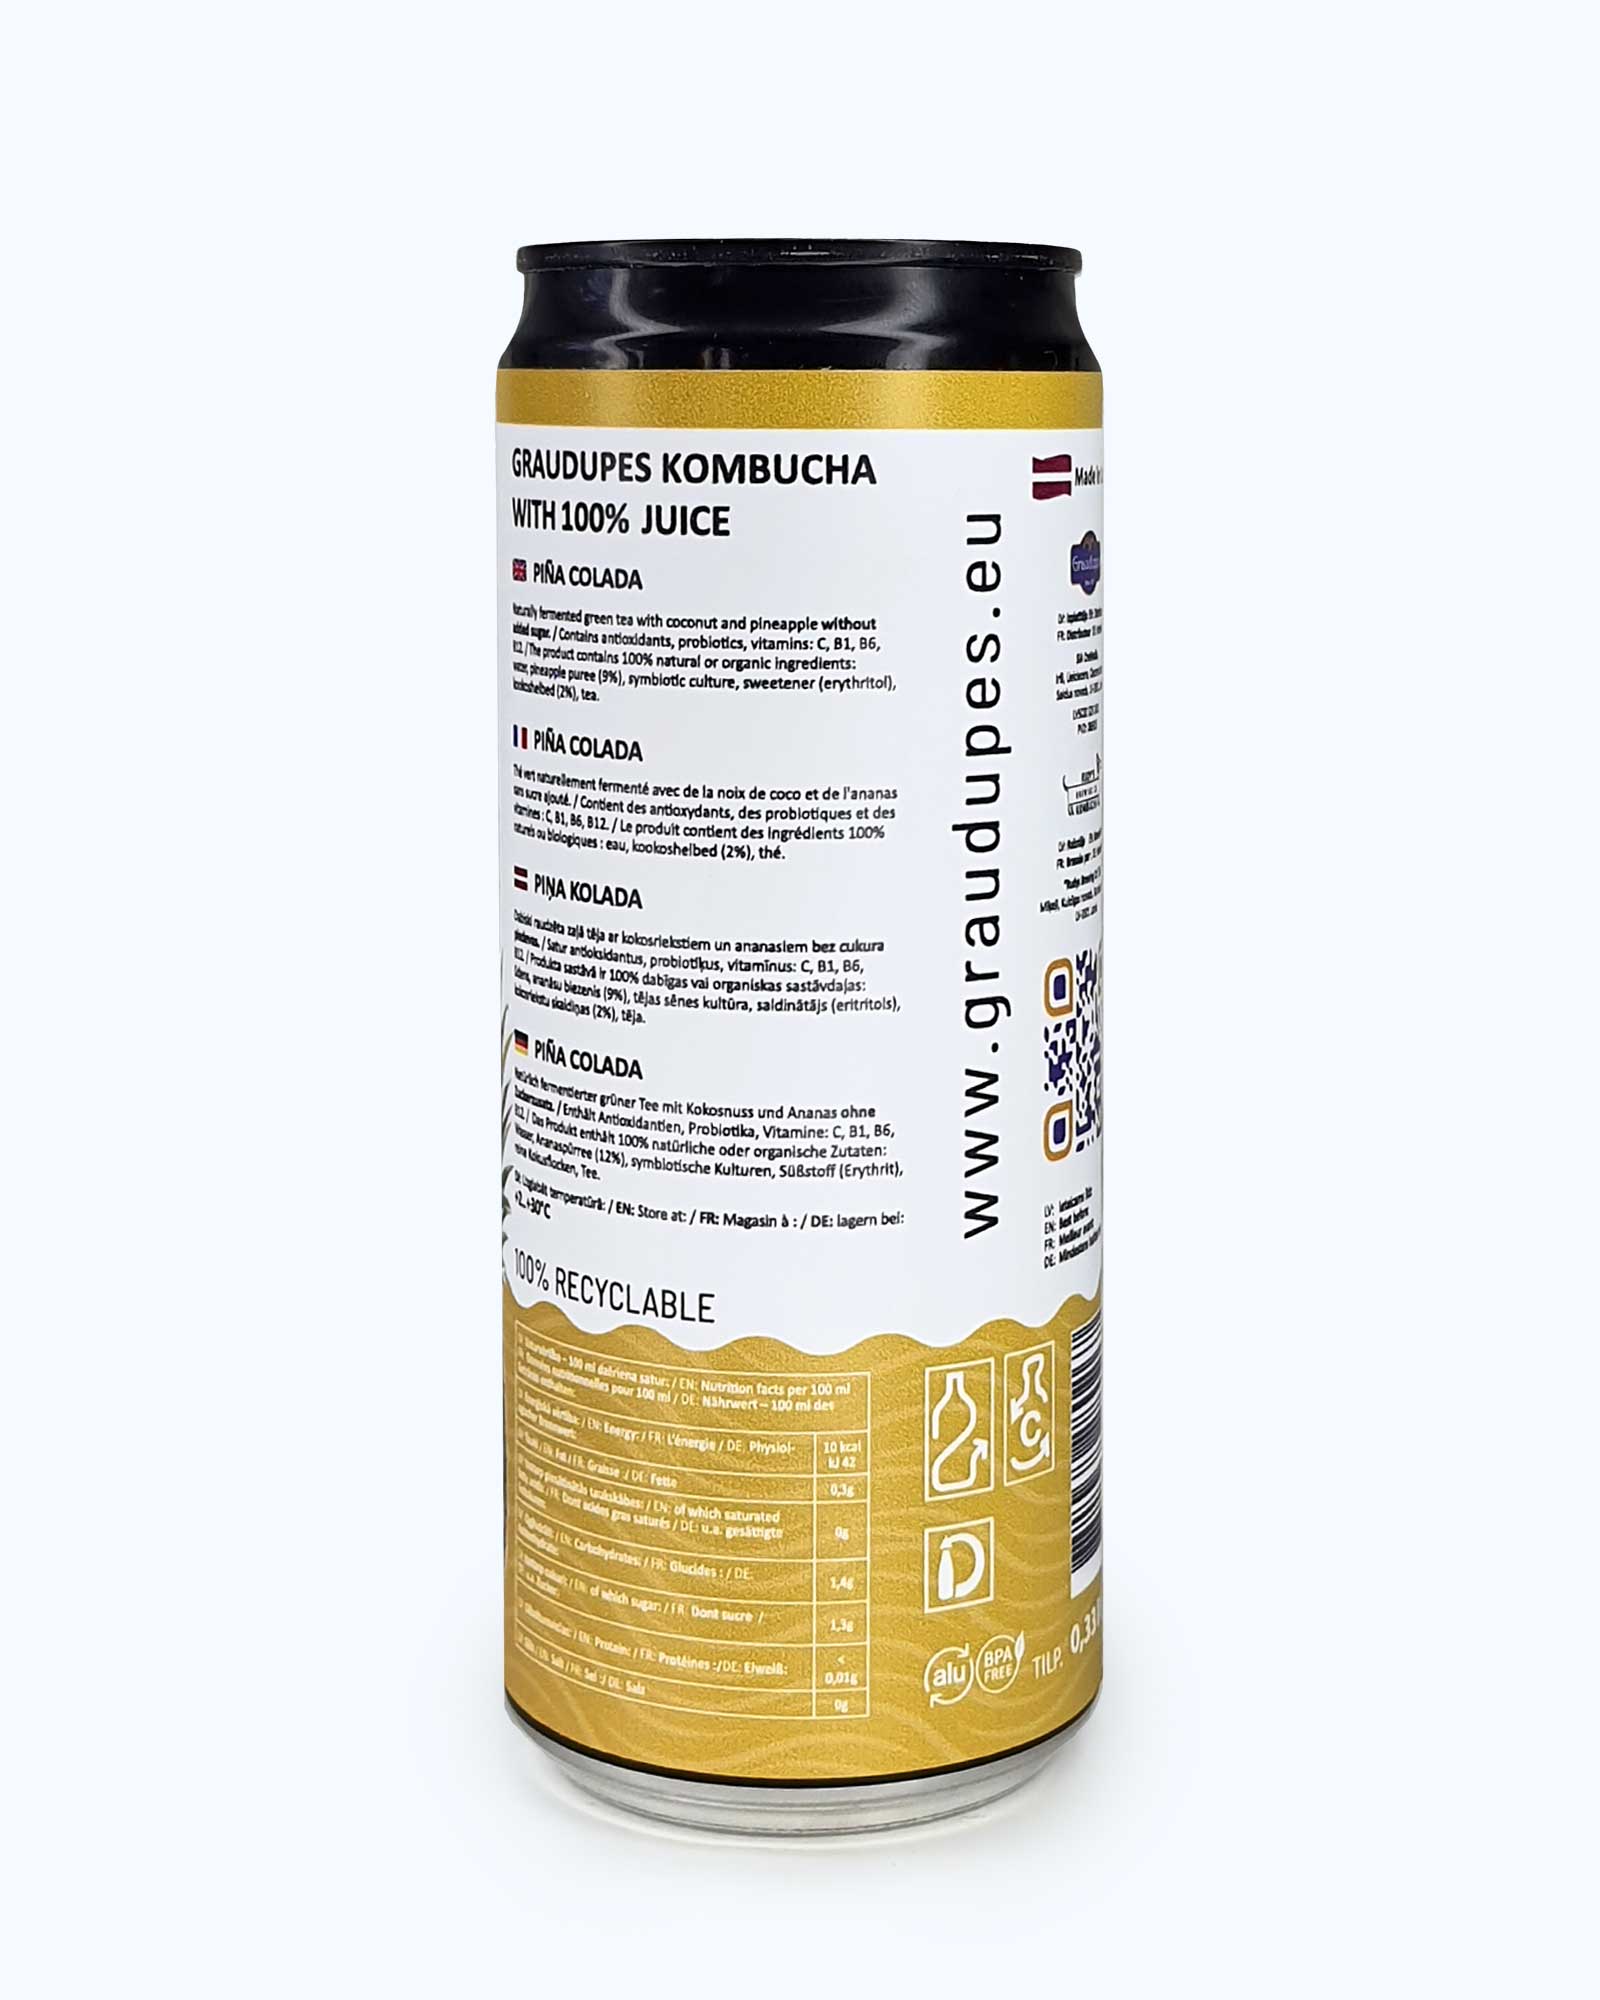 330ml can back side Graudupes Coconut & Pineapple Kombucha (Piña Colada) - Natural Fermented Tea Drink With Fruit Juice and Probiotics.